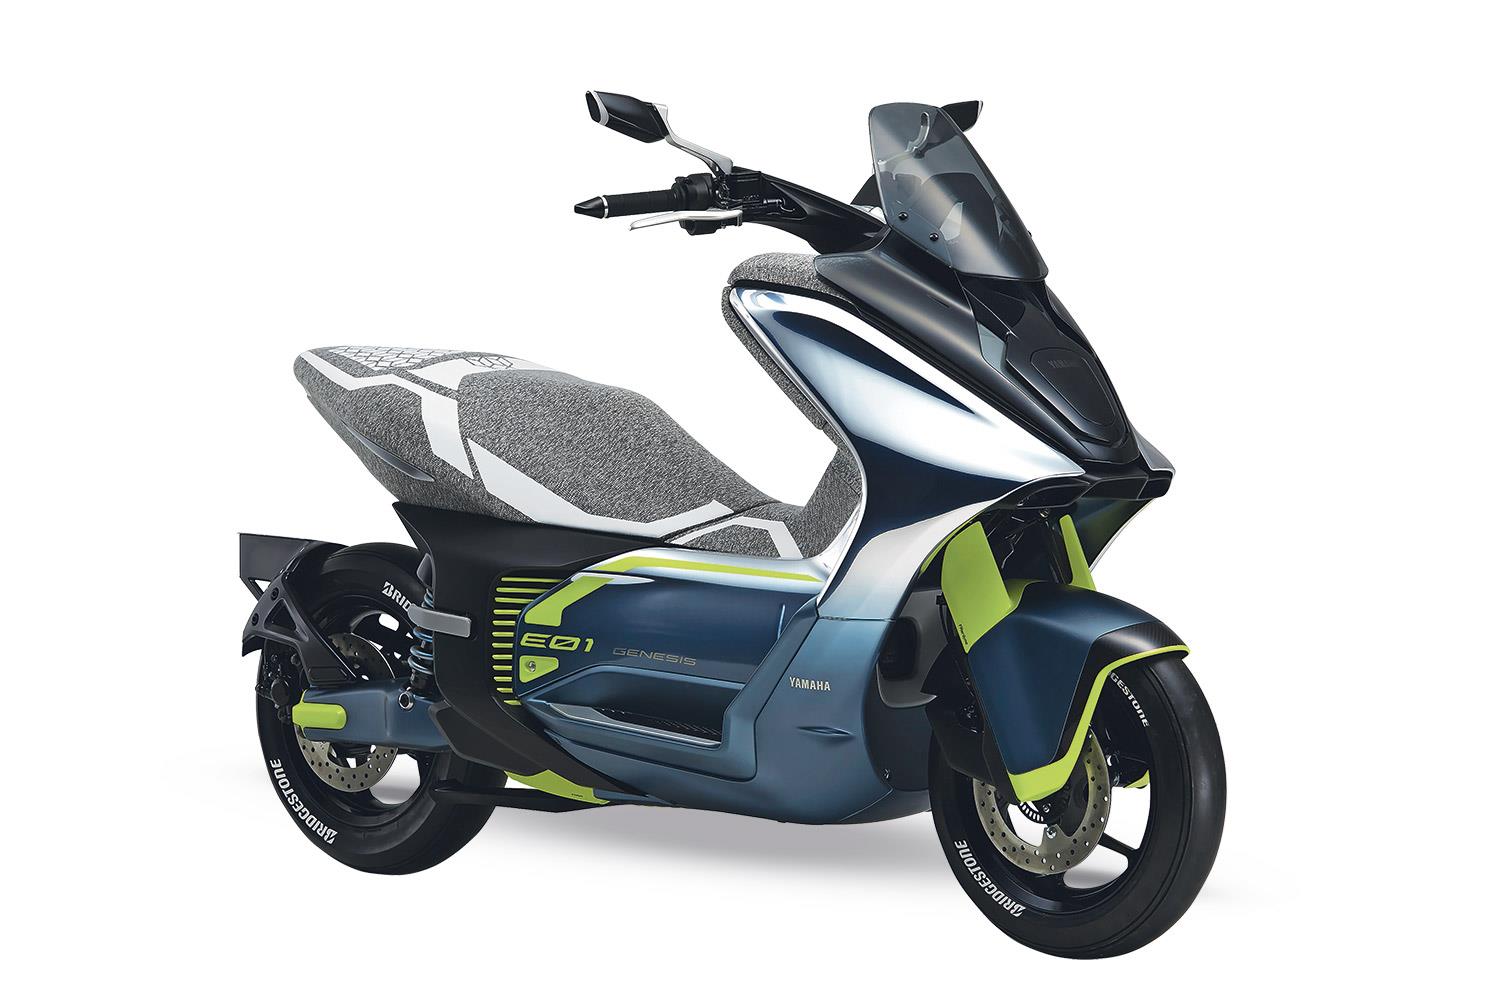 E01 electric scooter concept set for reality | MCN